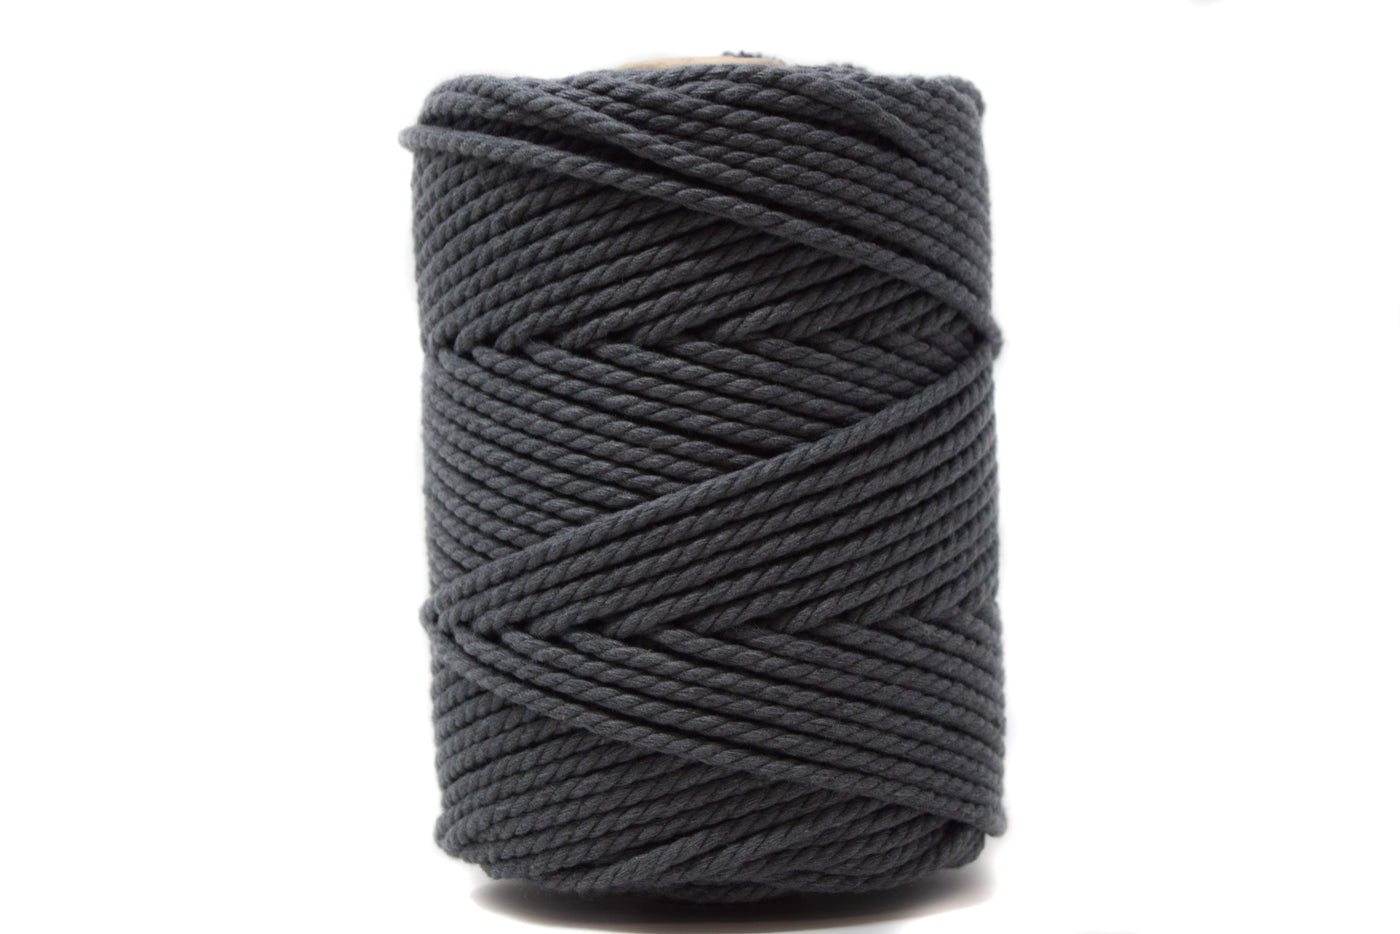 COTTON ROPE ZERO WASTE 3 MM - 3 PLY - CHARCOAL GRAY COLOR